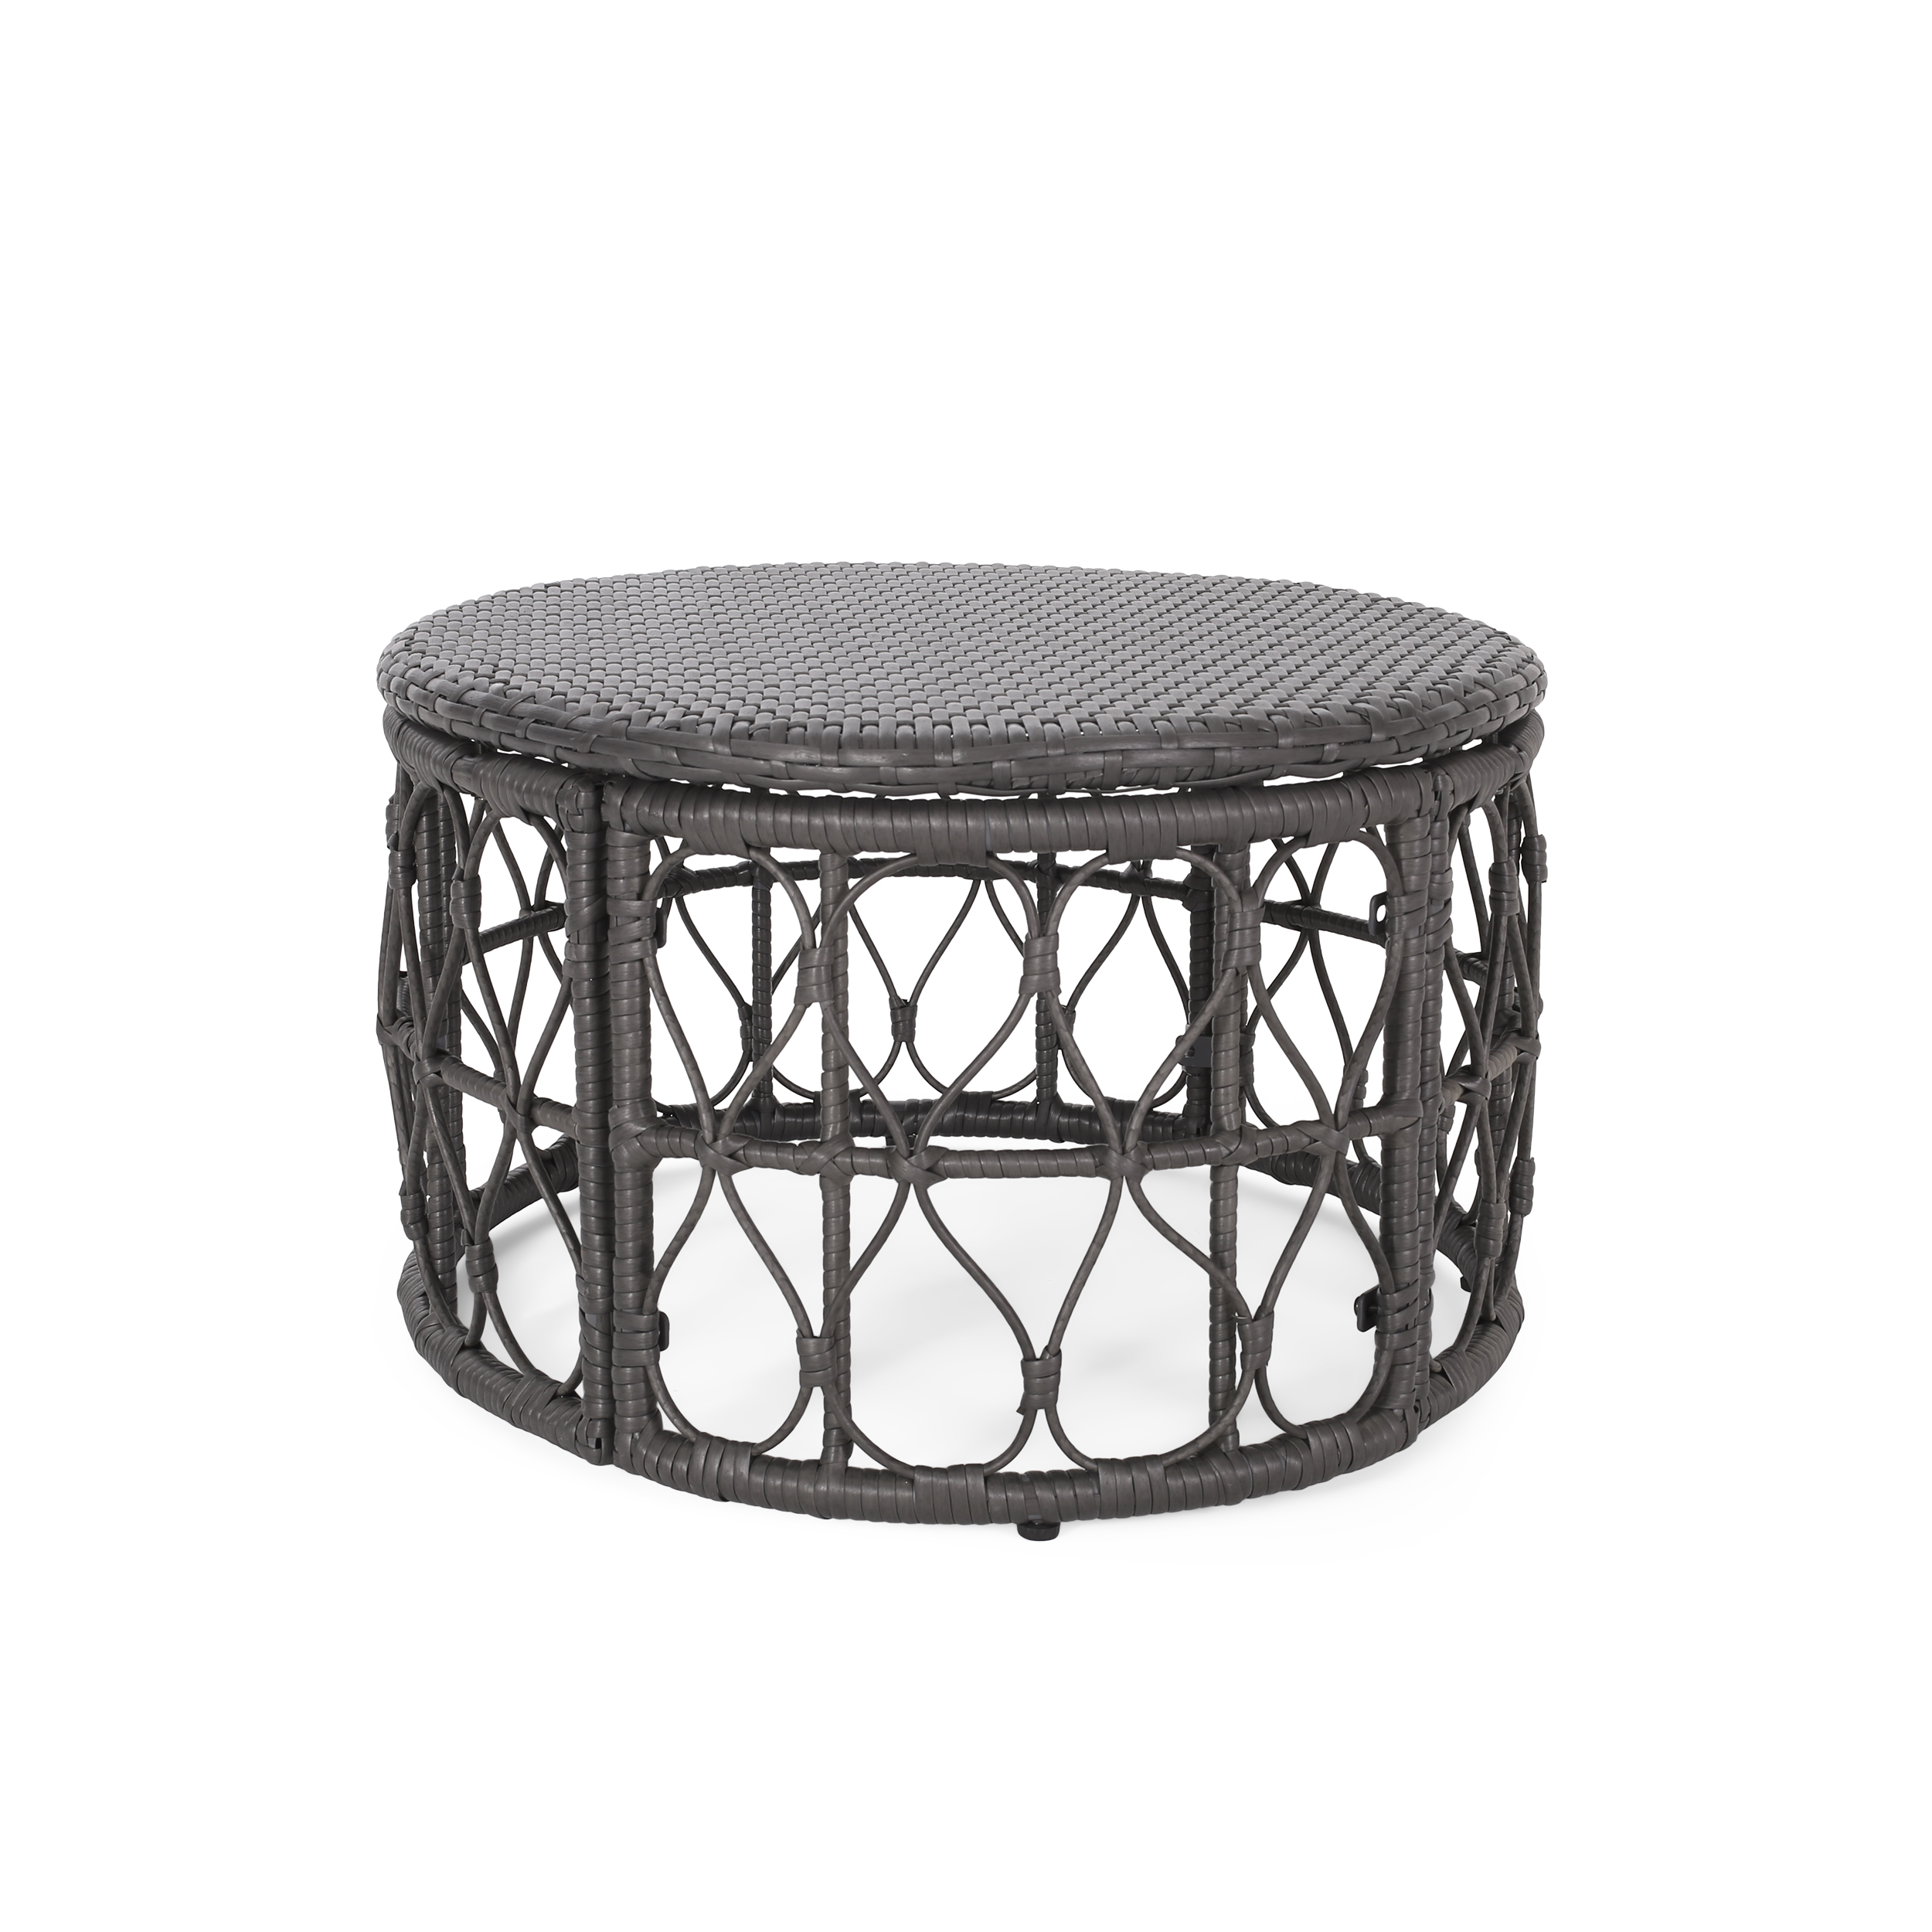 GDF Studio Colmar Outdoor Wicker Coffee Table, Faux Rattan and Iron, Gray - image 1 of 9